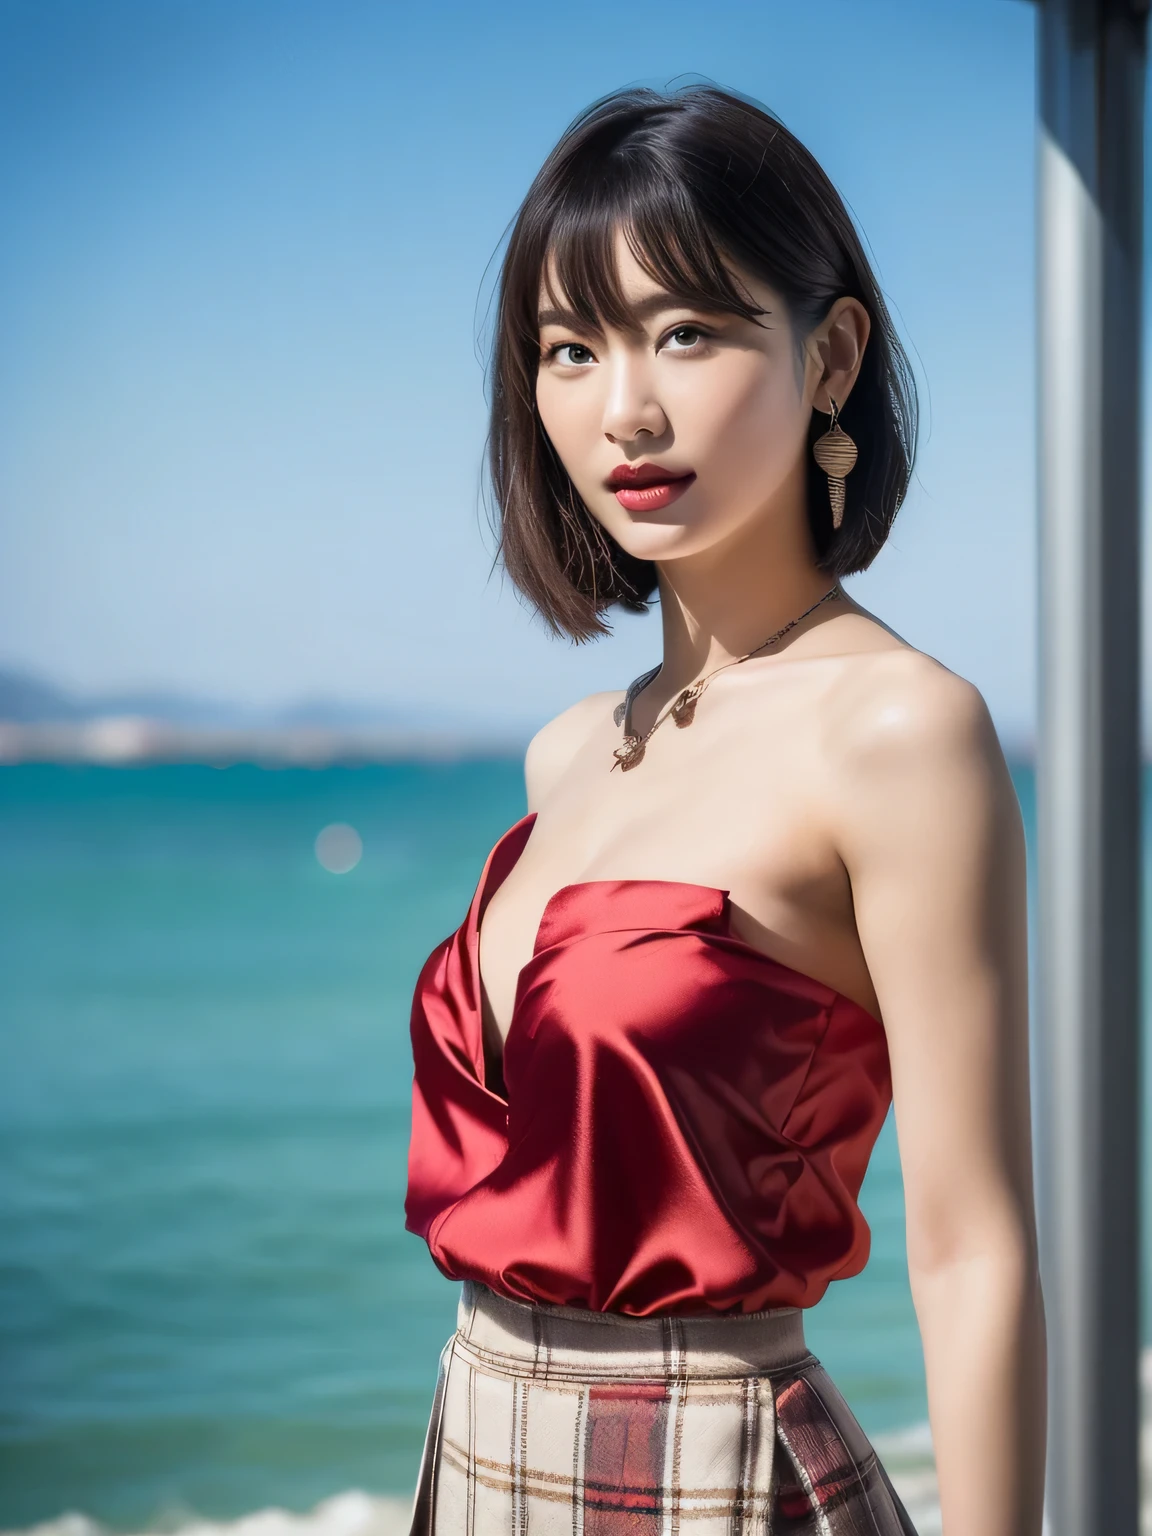 ((highest quality, 8K, masterpiece :1.3)), (realistic, Photoreal:1.4), sharp focus：1.2, 
Bright colors, professional level, shallow depth of field, 
20-year-old, 1 person, A beautiful face with intelligence, 
Supple body :1.3, model body shape:1.5, 頭w:1.4, perfect style：1.4, 
narrow shoulders, beautiful clavicle, long and thin legs, The beauty of slim abs :1.2, thin waist :1.2, 
super detailed skin, Fair skin, Shiny skin, 
super detailed face, slim facial contour, beautiful small face, Beautiful lined nose, 
super detailed eyes, long slit eyes, brown eyes, double eyelid, beautiful thin eyebrows, fine long eyelashes, 
super detailed lips, plump lips, glossy pink lips, flushed cheeks, beautiful teeth, 
Beautiful actress&#39;s ennui makeup, pink lipstick, (necklace, earrings), 
milk greige hair, delicate soft hair, 
(hair up, medium short hair, ponytail:1.2), layer cut, (dull bangs:1.2), 
(Dress up with trendy fashion:1.2), 
gentle smile, open mouth half way, Enchanted expression, stare at the camera, 
dynamic lighting, ((Hasselblad Photos)), 

((She is completely naked and is wearing a red satin top with a heart pattern.:1.3)), 
((She is wearing a plaid pleated skirt.:1.3)), 
(perfect breast shape, B cup:1.2), It is a small pale pink areola., slouch, 
She has a cute plump butt, My thighs are dazzling, 
(View from the front, We focus on the crotch, full body portrait:1.5), 

blue sky and aegean sea, sea beach, The horizon of the ocean spreading out in the background, 
walking with beautiful posture, 
Posing with palms like a , spreading my legs, 
cinematic lighting, midsummer rays, Bright light shining all over, 